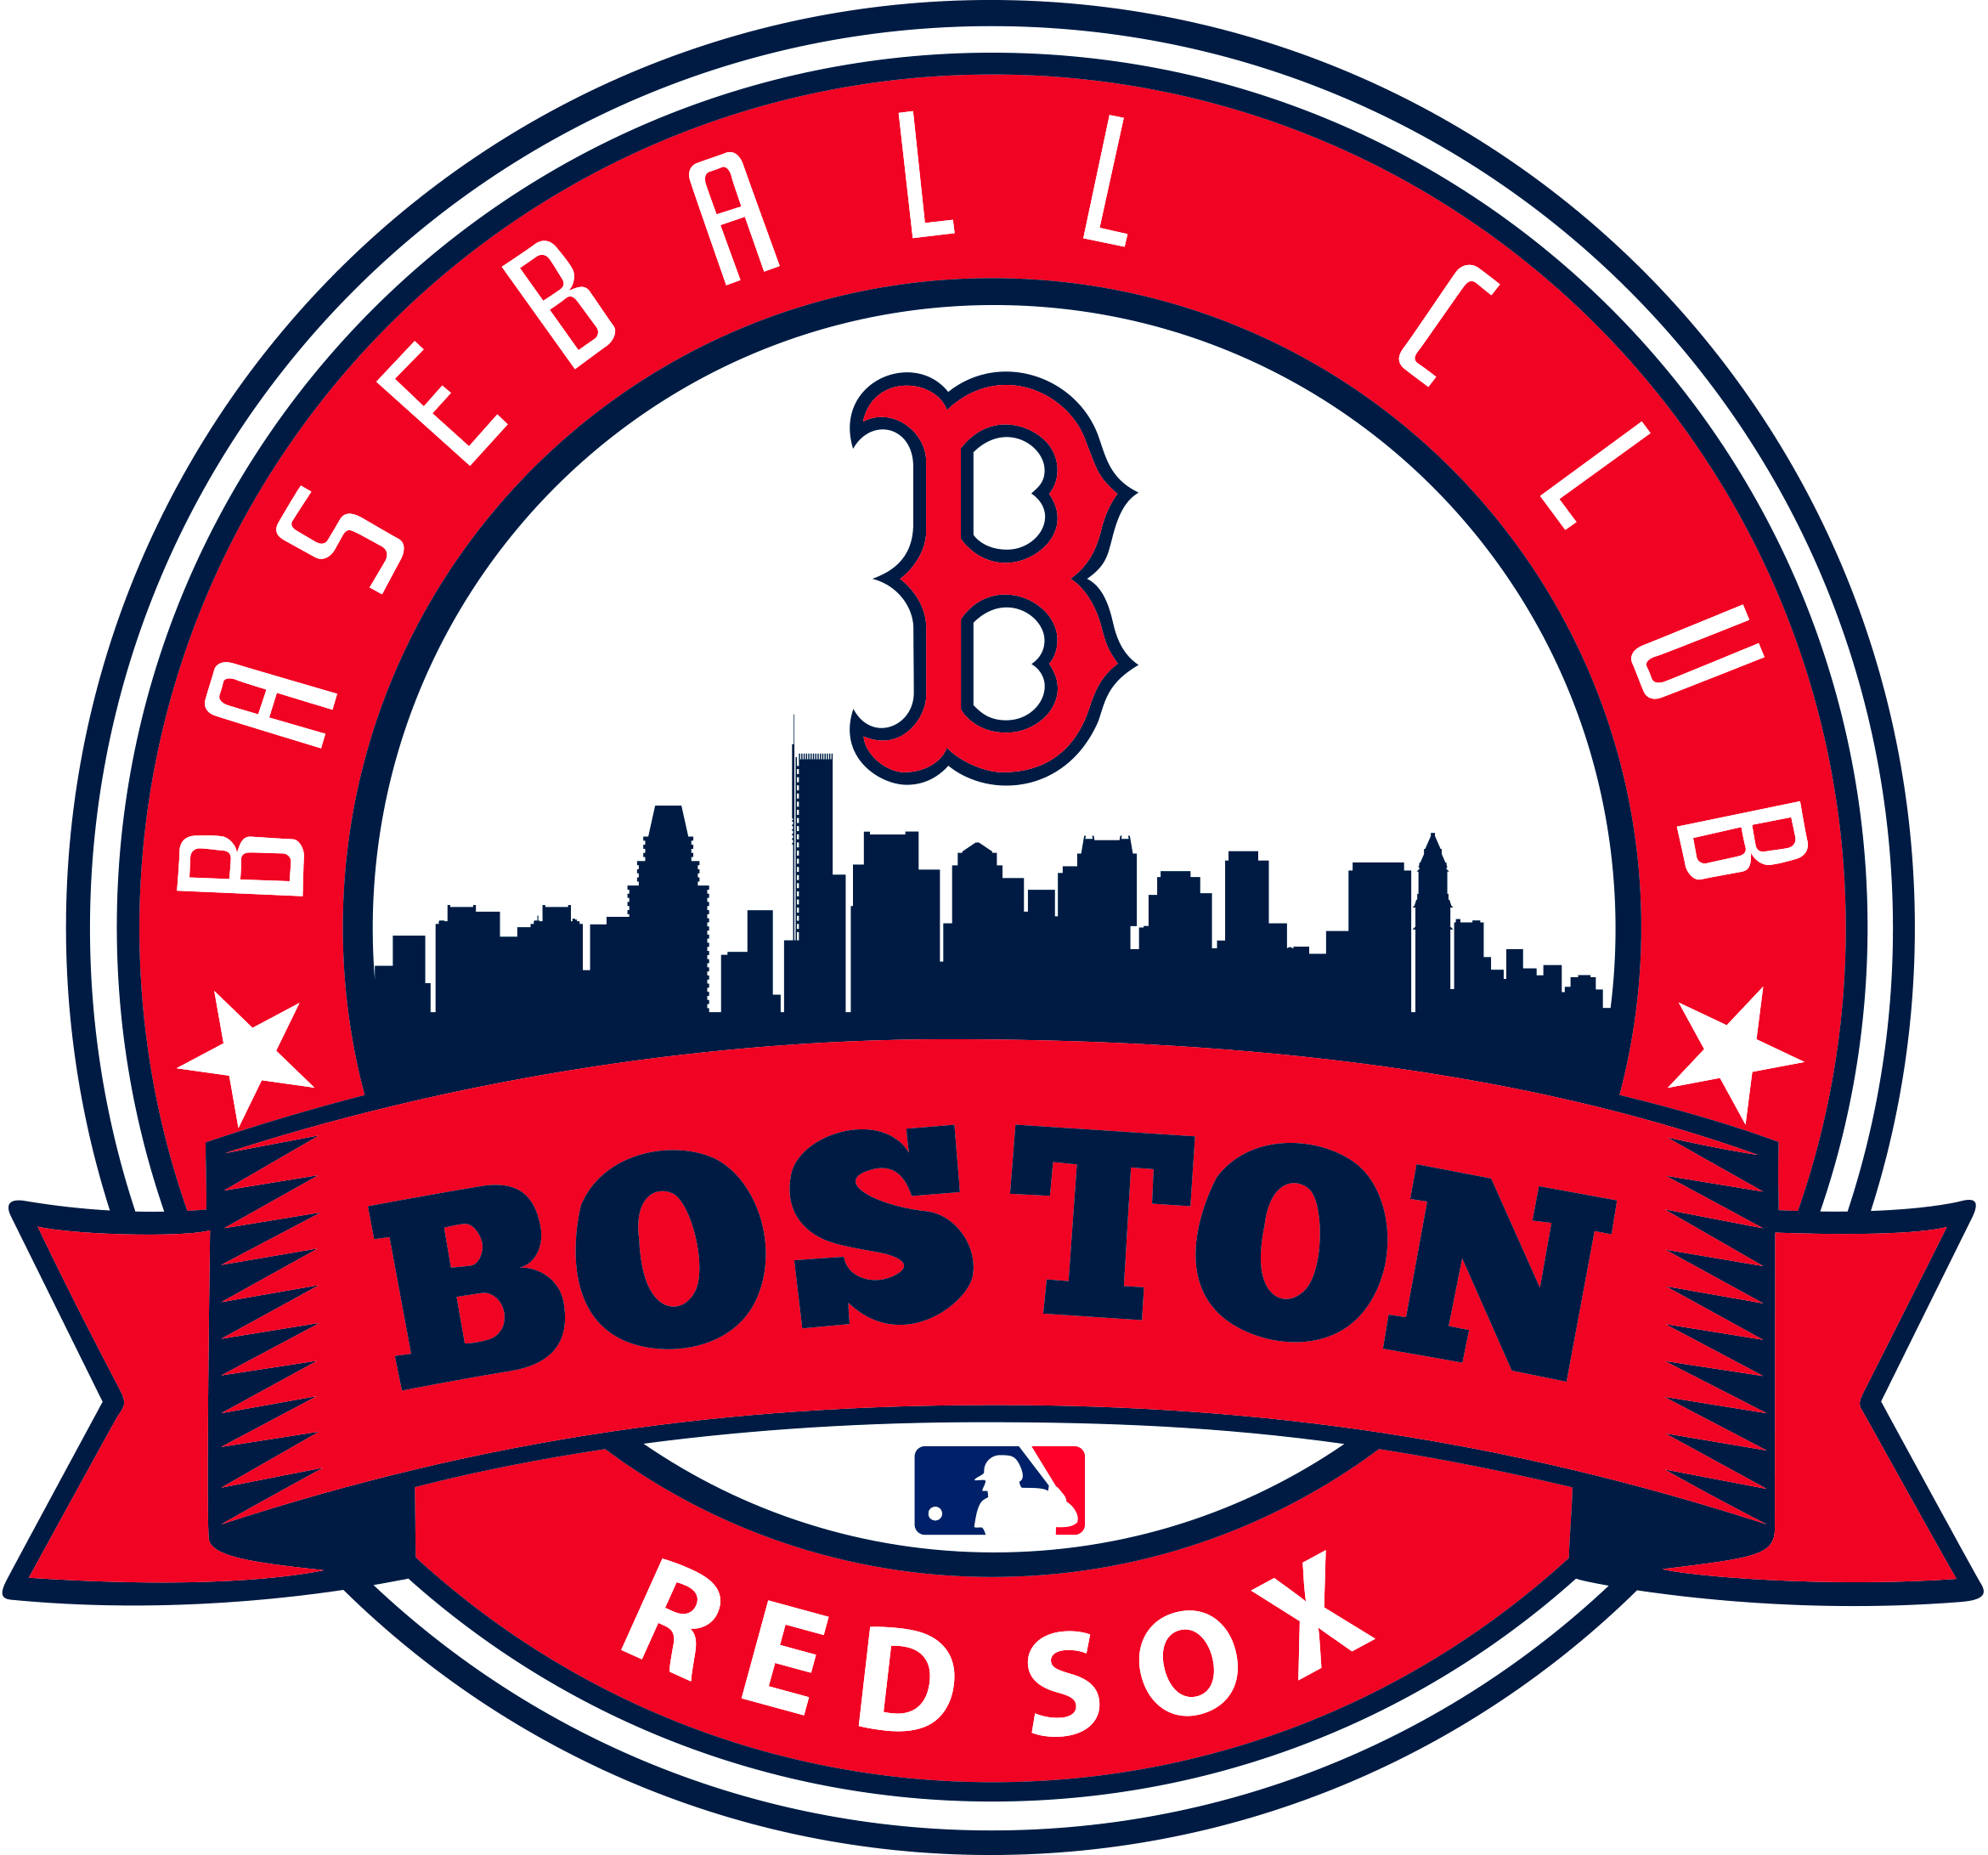 Boston Red Sox SVG File – Vector Design in, Svg, Eps, Dxf, and Jpeg Format  for Cricut and Silhouette, Digital download (Copy) – SVG Shop